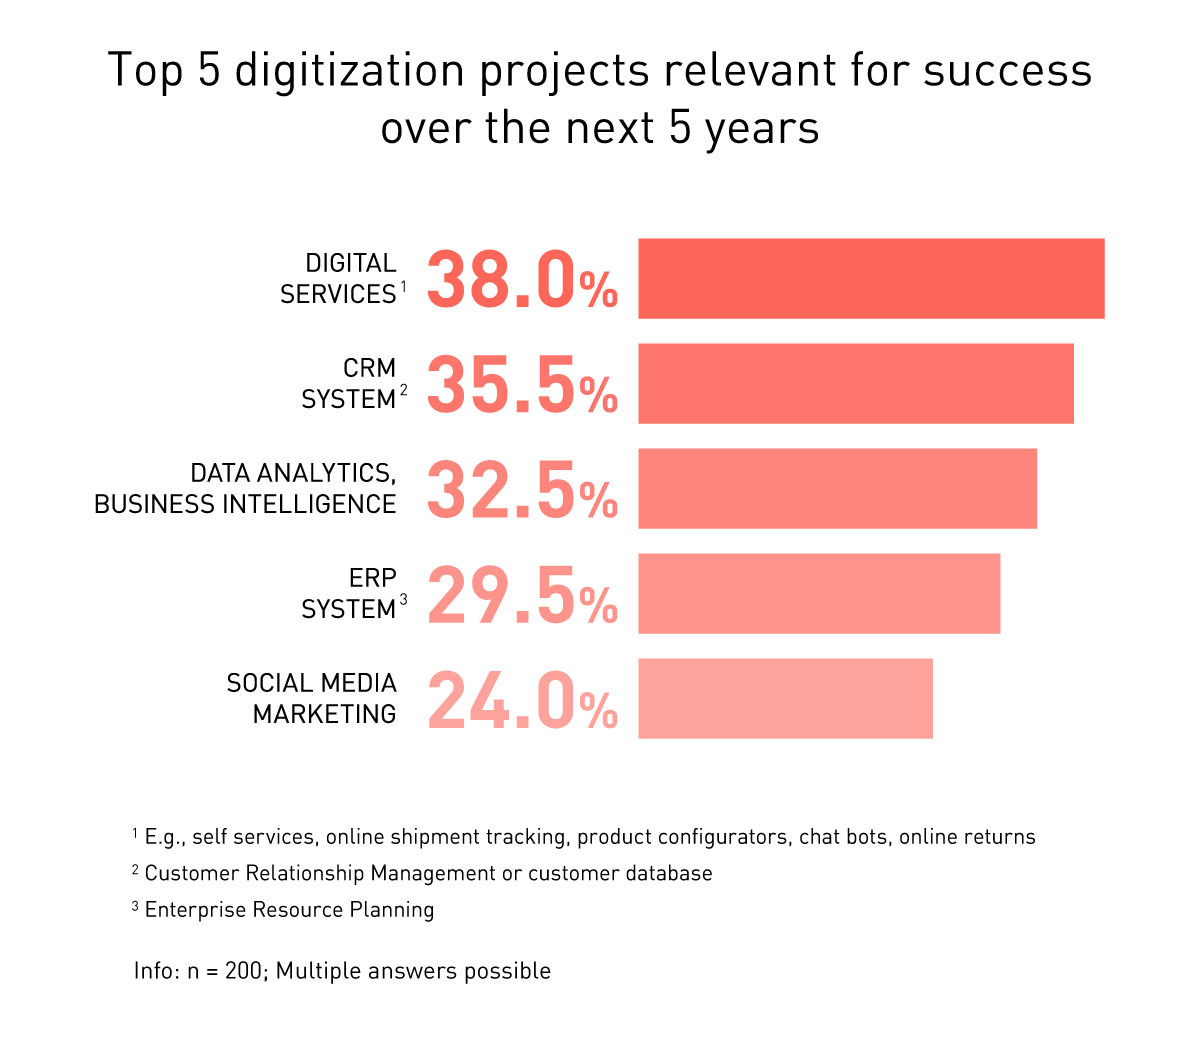 TOP 5 digitization projects relevant for success over the next 5 years